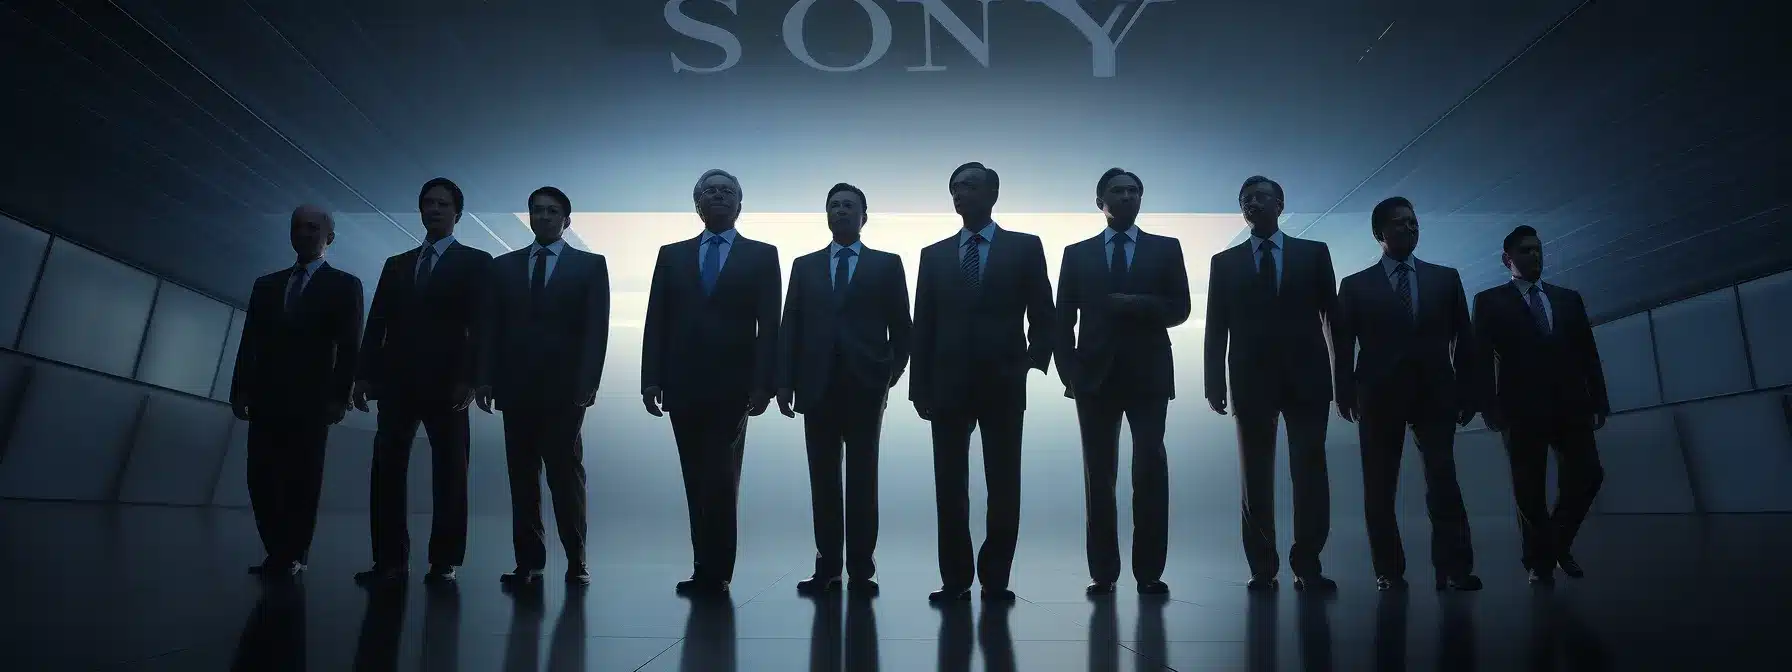 A Group Of Executives Dressed In Business Attire Standing Confidently In Front Of A Large Corporate Logo.